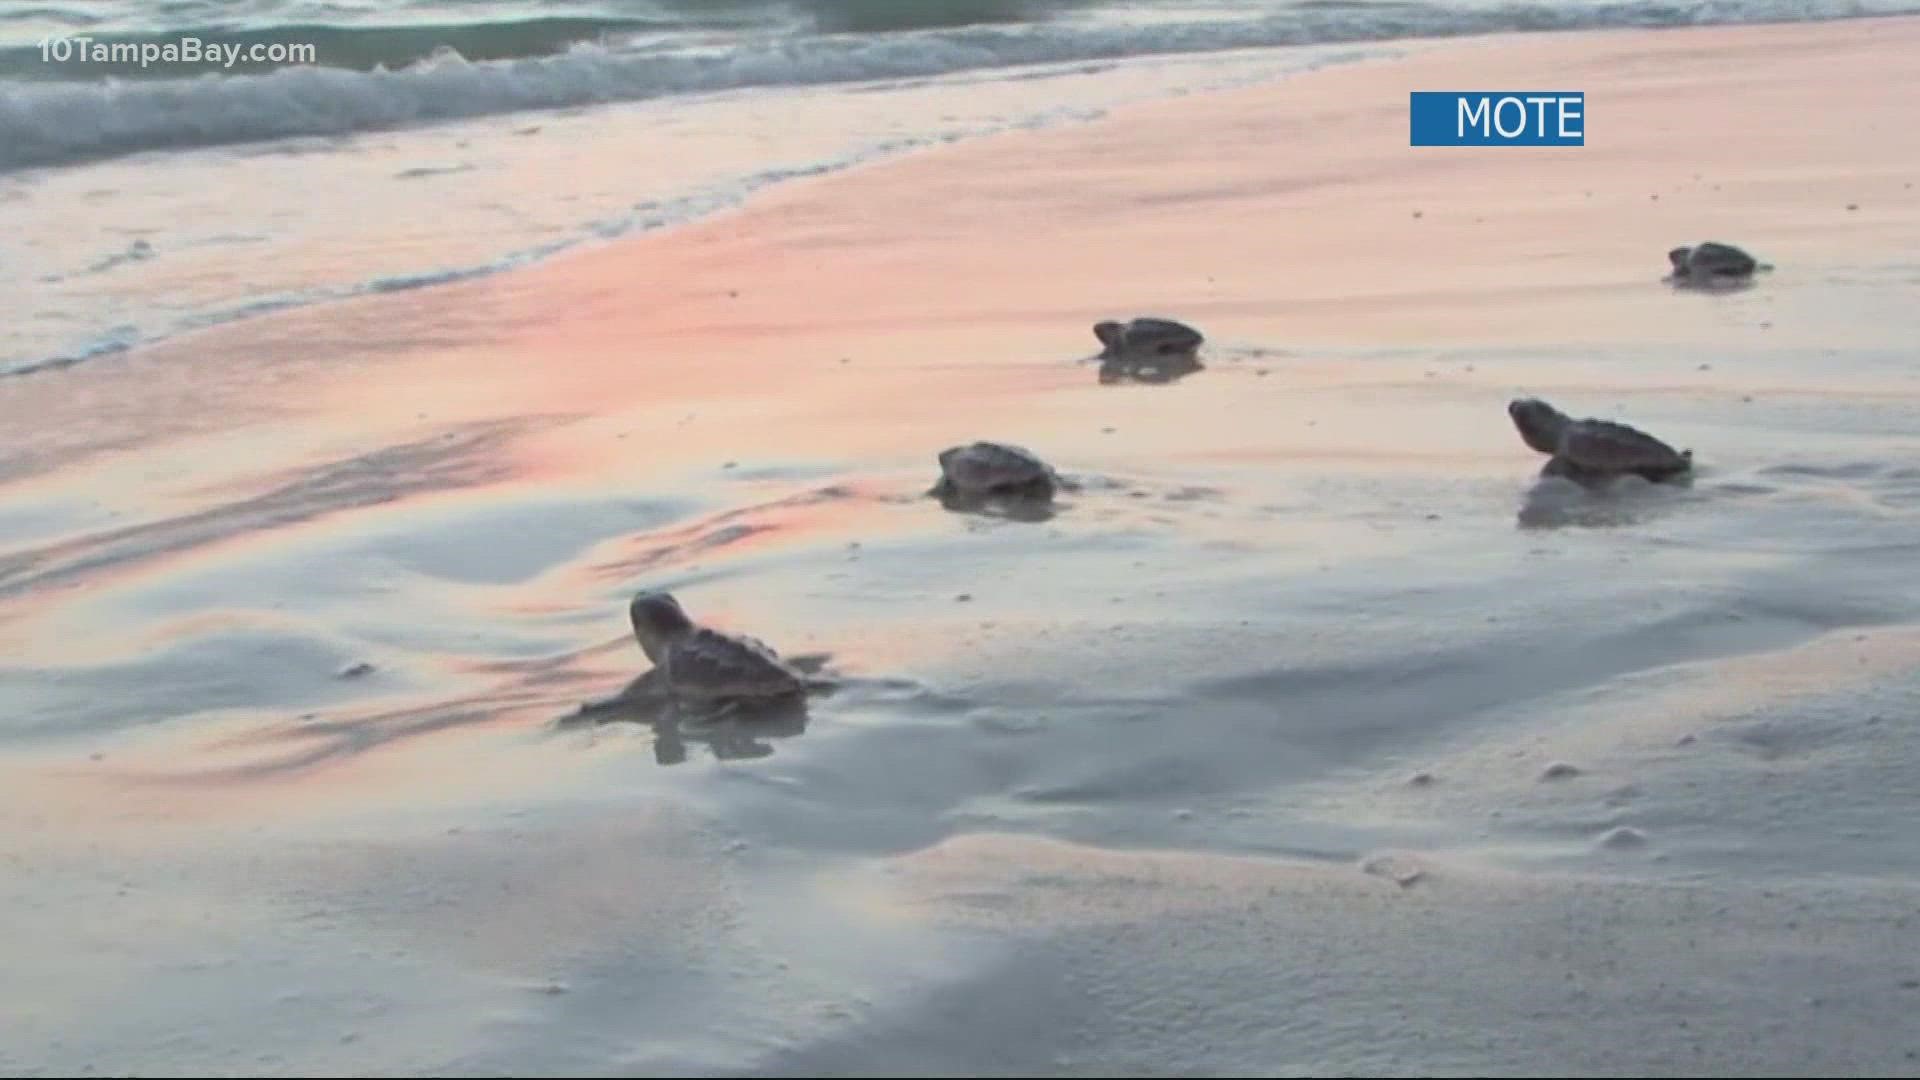 Scientists are heading to beaches to remind folks to be mindful of nests.